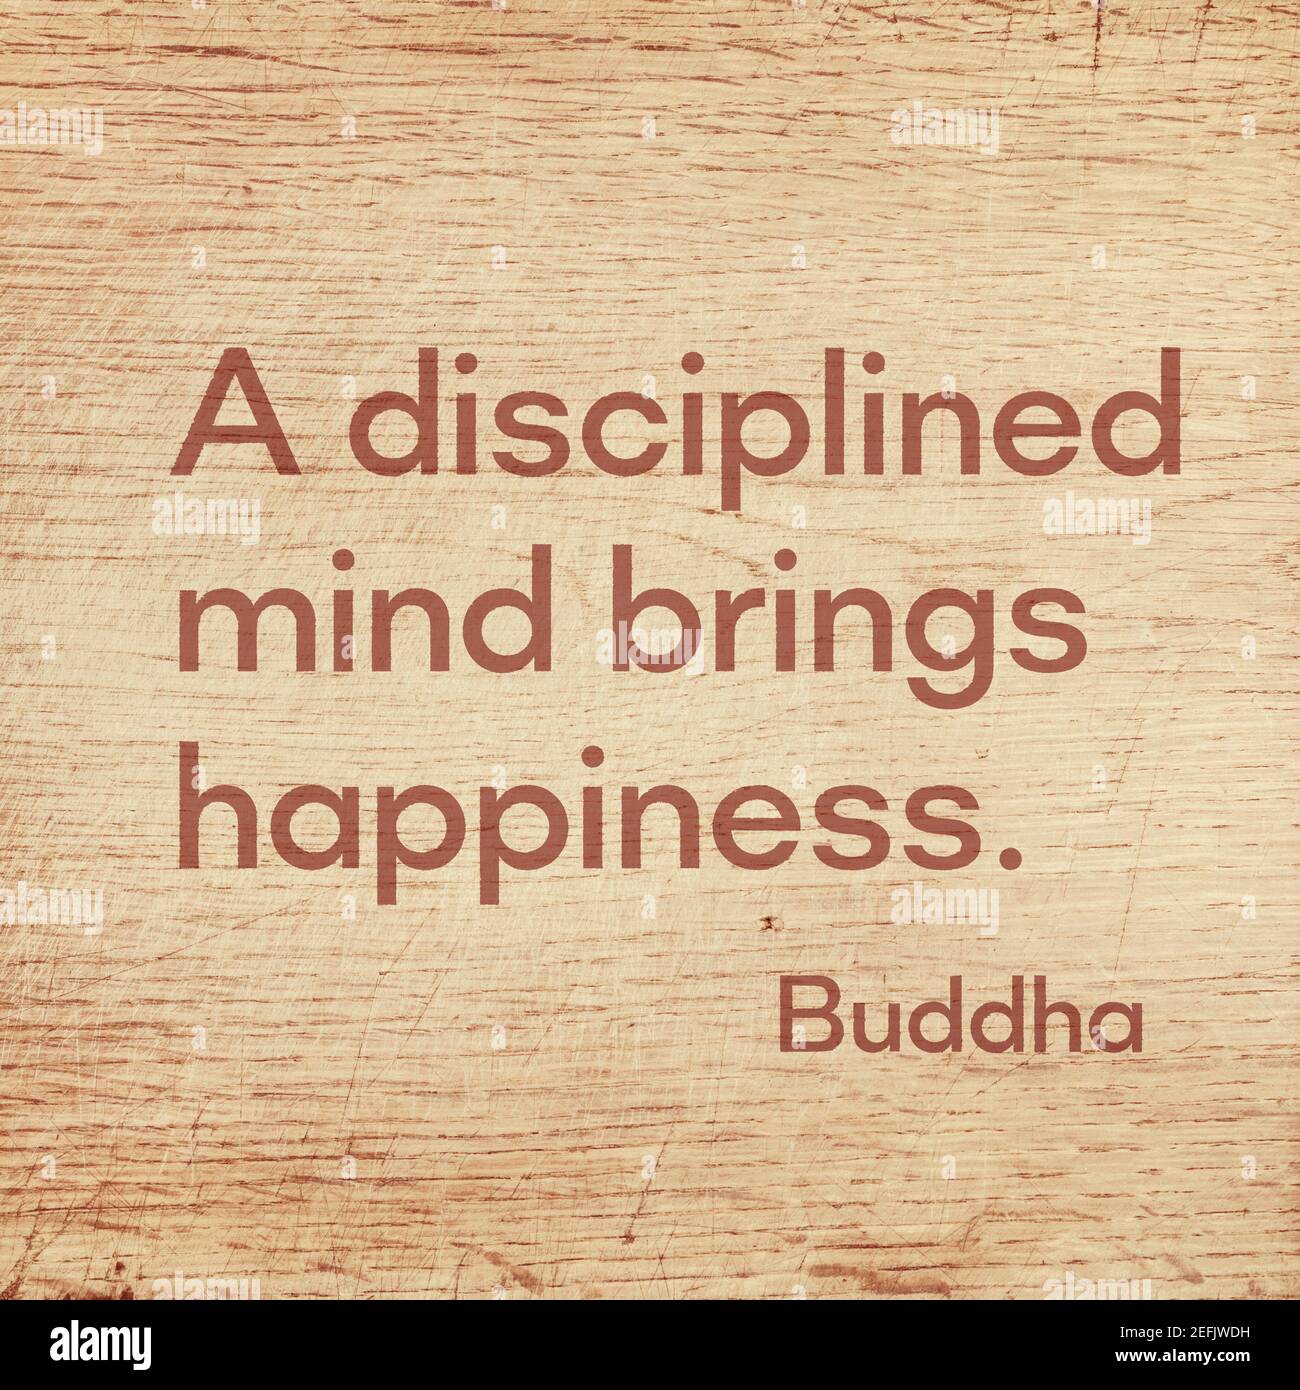 A disciplined mind brings happiness - famous quote of Gautama Buddha printed on grunge wooden board Stock Photo